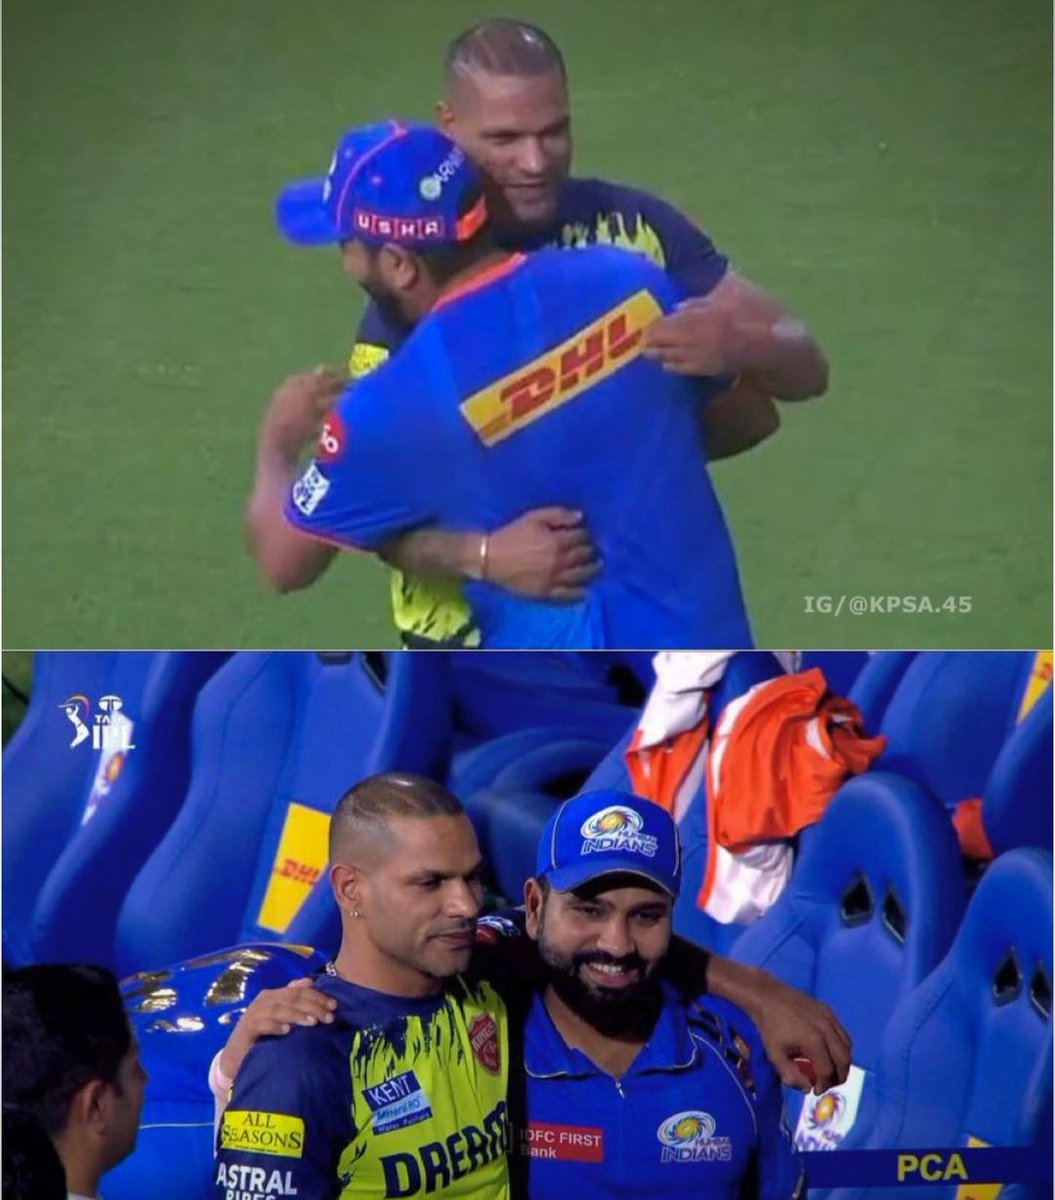 This duo ..this pair serve Indian opening over a decade...
#brocode 
#bond
#Rohitsharma
#Shikhardhawan